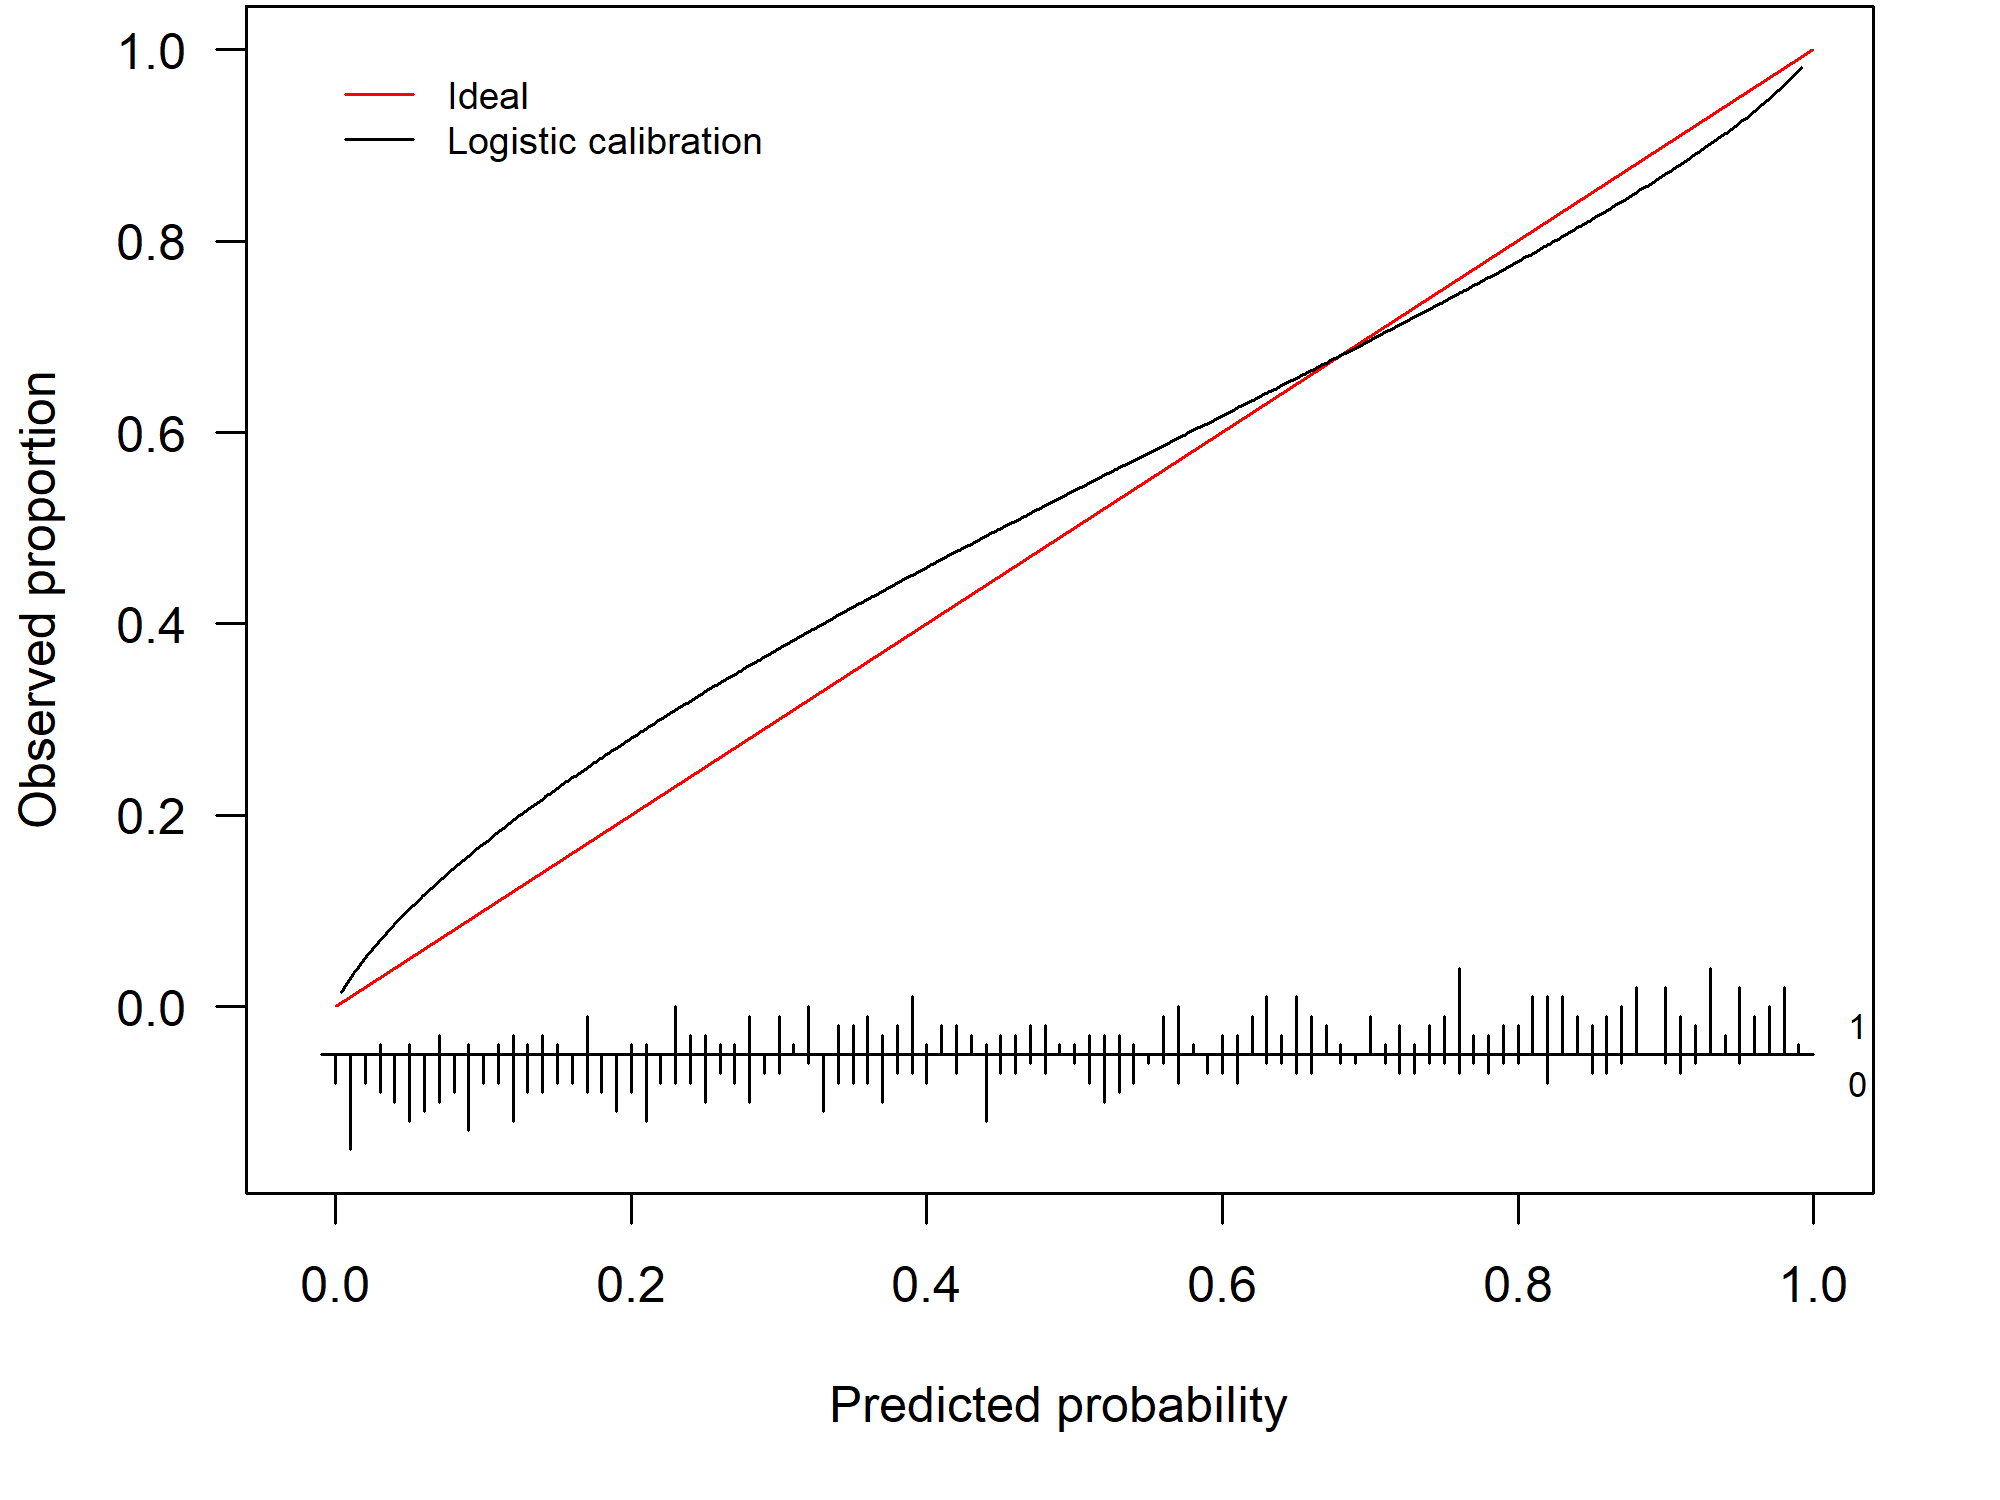 Example of a miscalibrated model due to overfitting